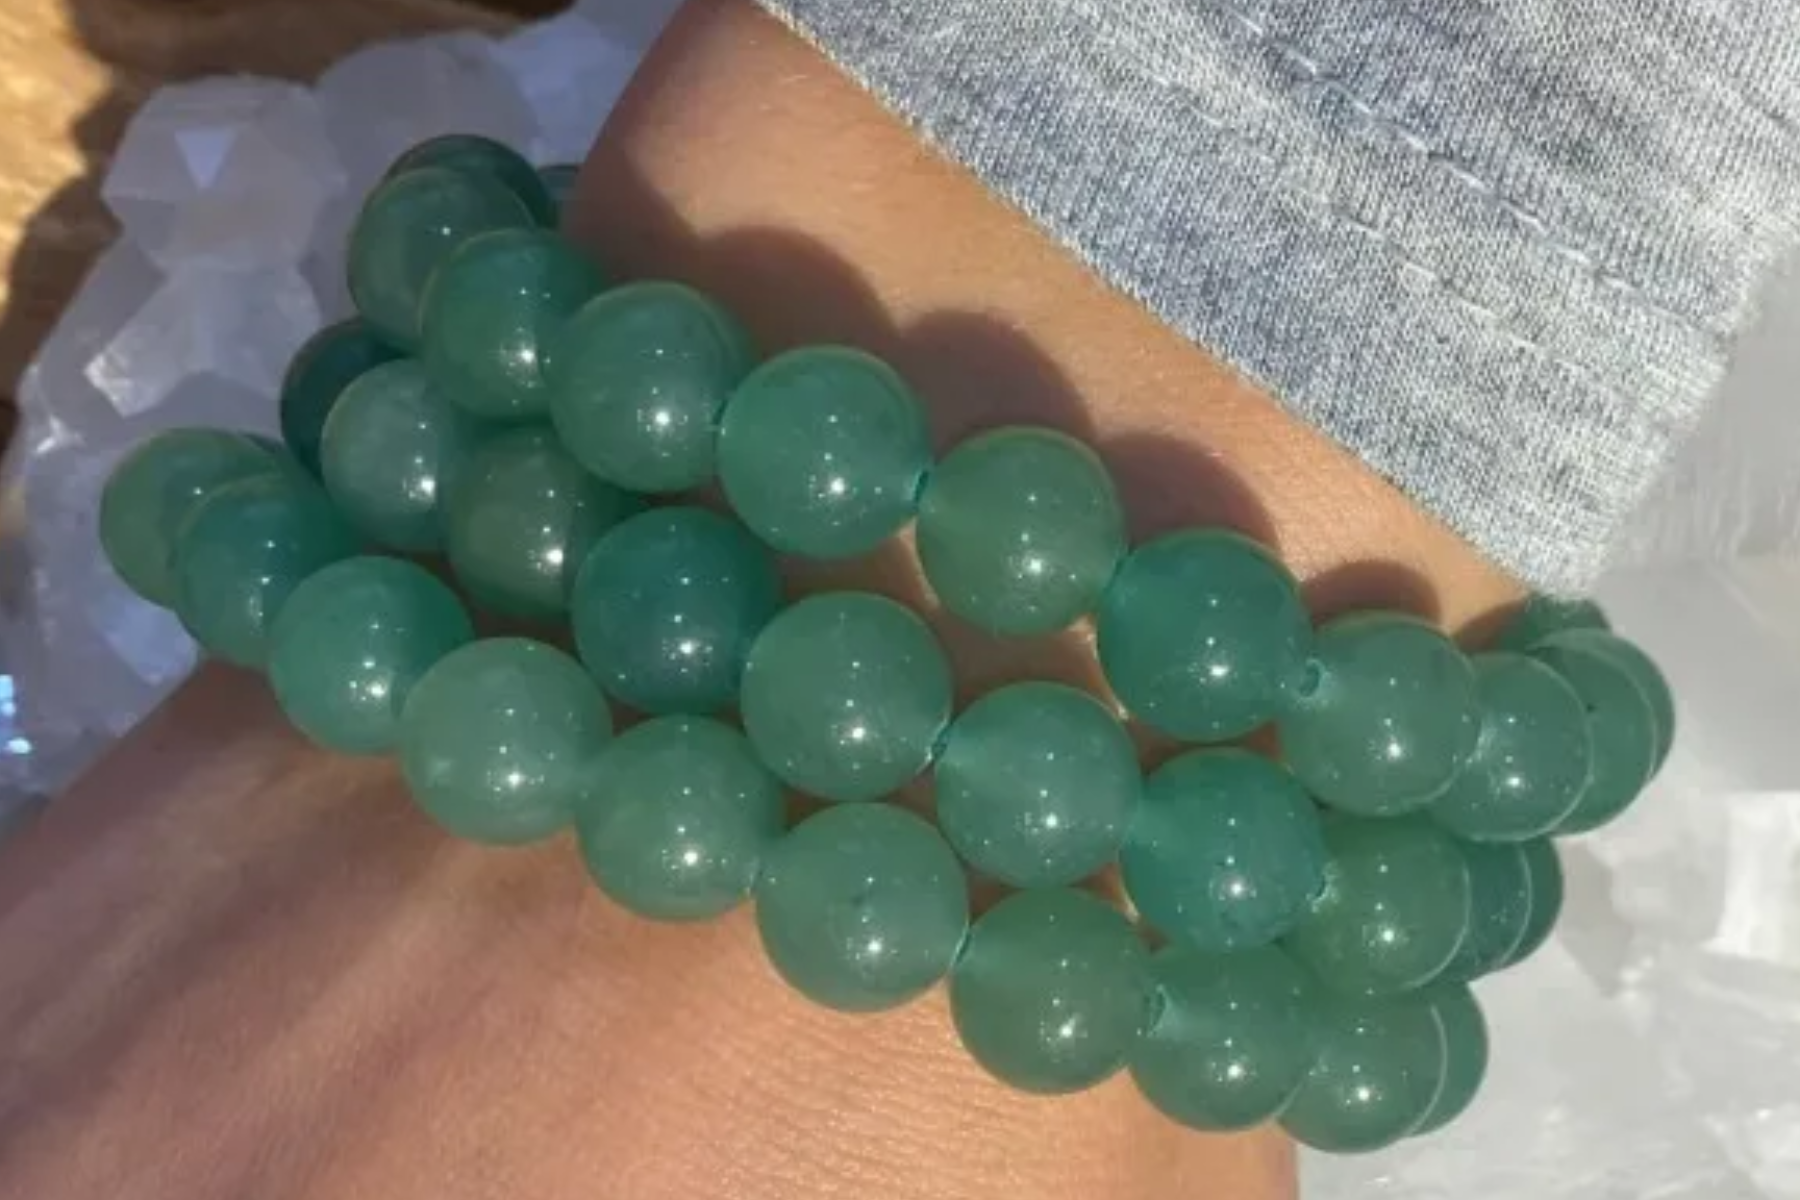 A person's wrist adorned with three bracelets made of aventurine